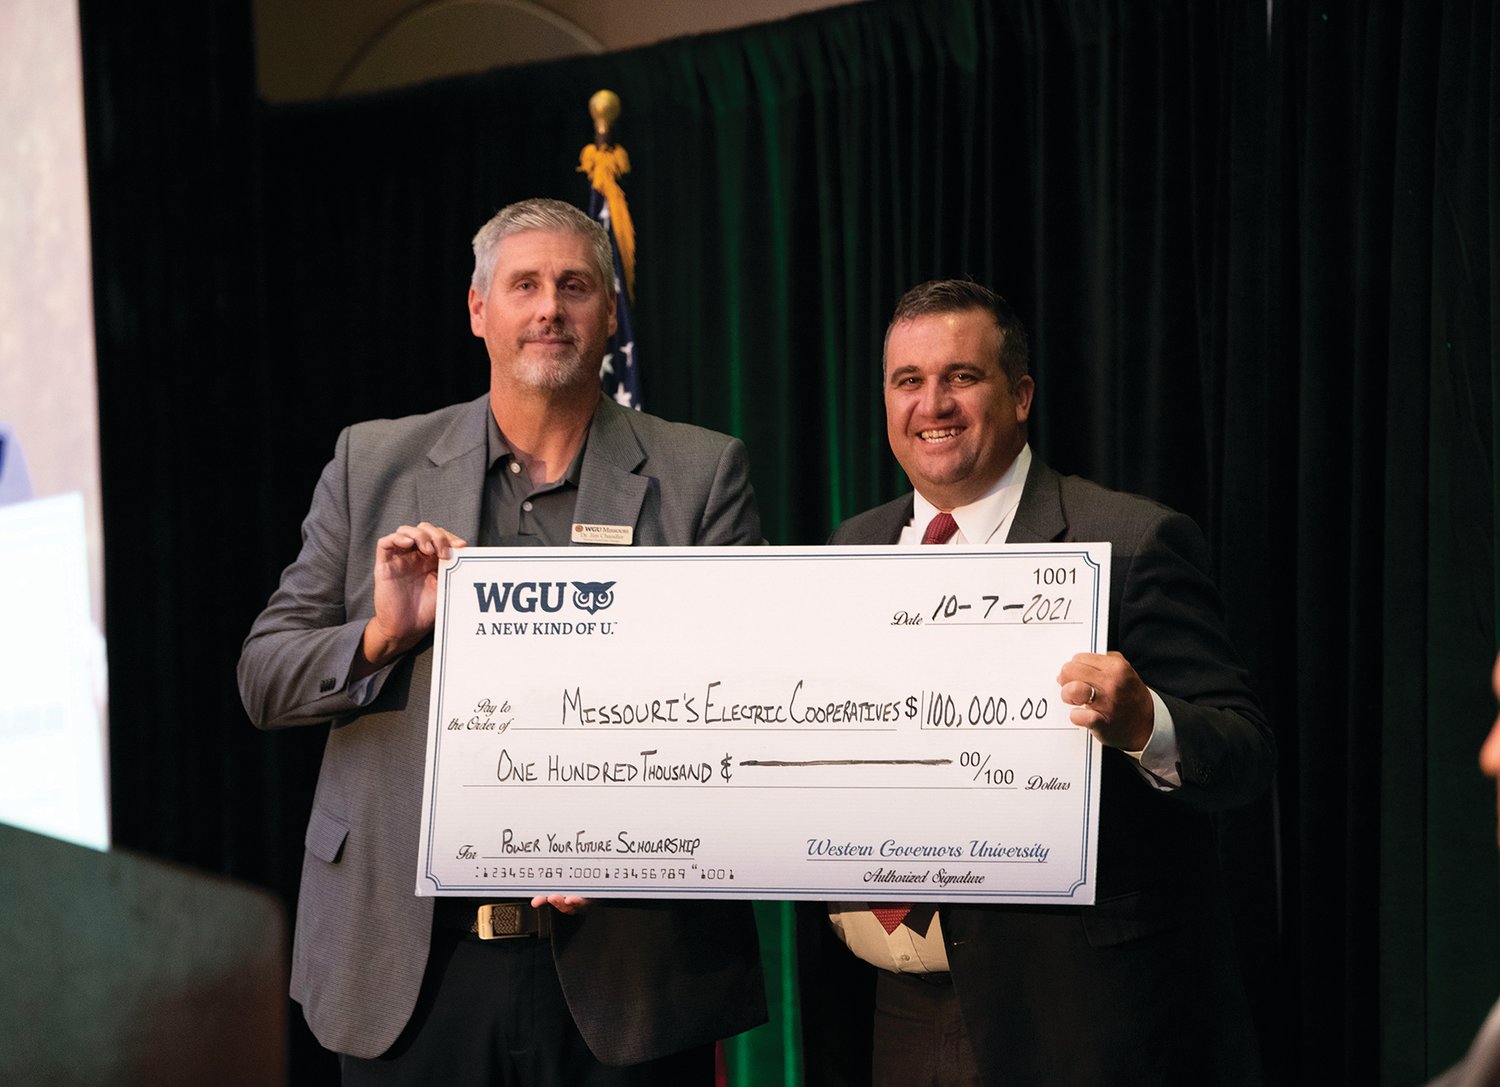 Jim Chandler (left), Strategic Partnerships Manager with WGU Missouri, presented AMEC CEO Caleb Jones (right) with a check for $100,000 to fund “Power Your Future” Scholarships for residents throughout the state. The check presentation was made during AMEC’s annual meeting, held in late September. WGU Missouri is working with AMEC to award $100,000 in scholarships to co-op members and employees who are interested in furthering their education.